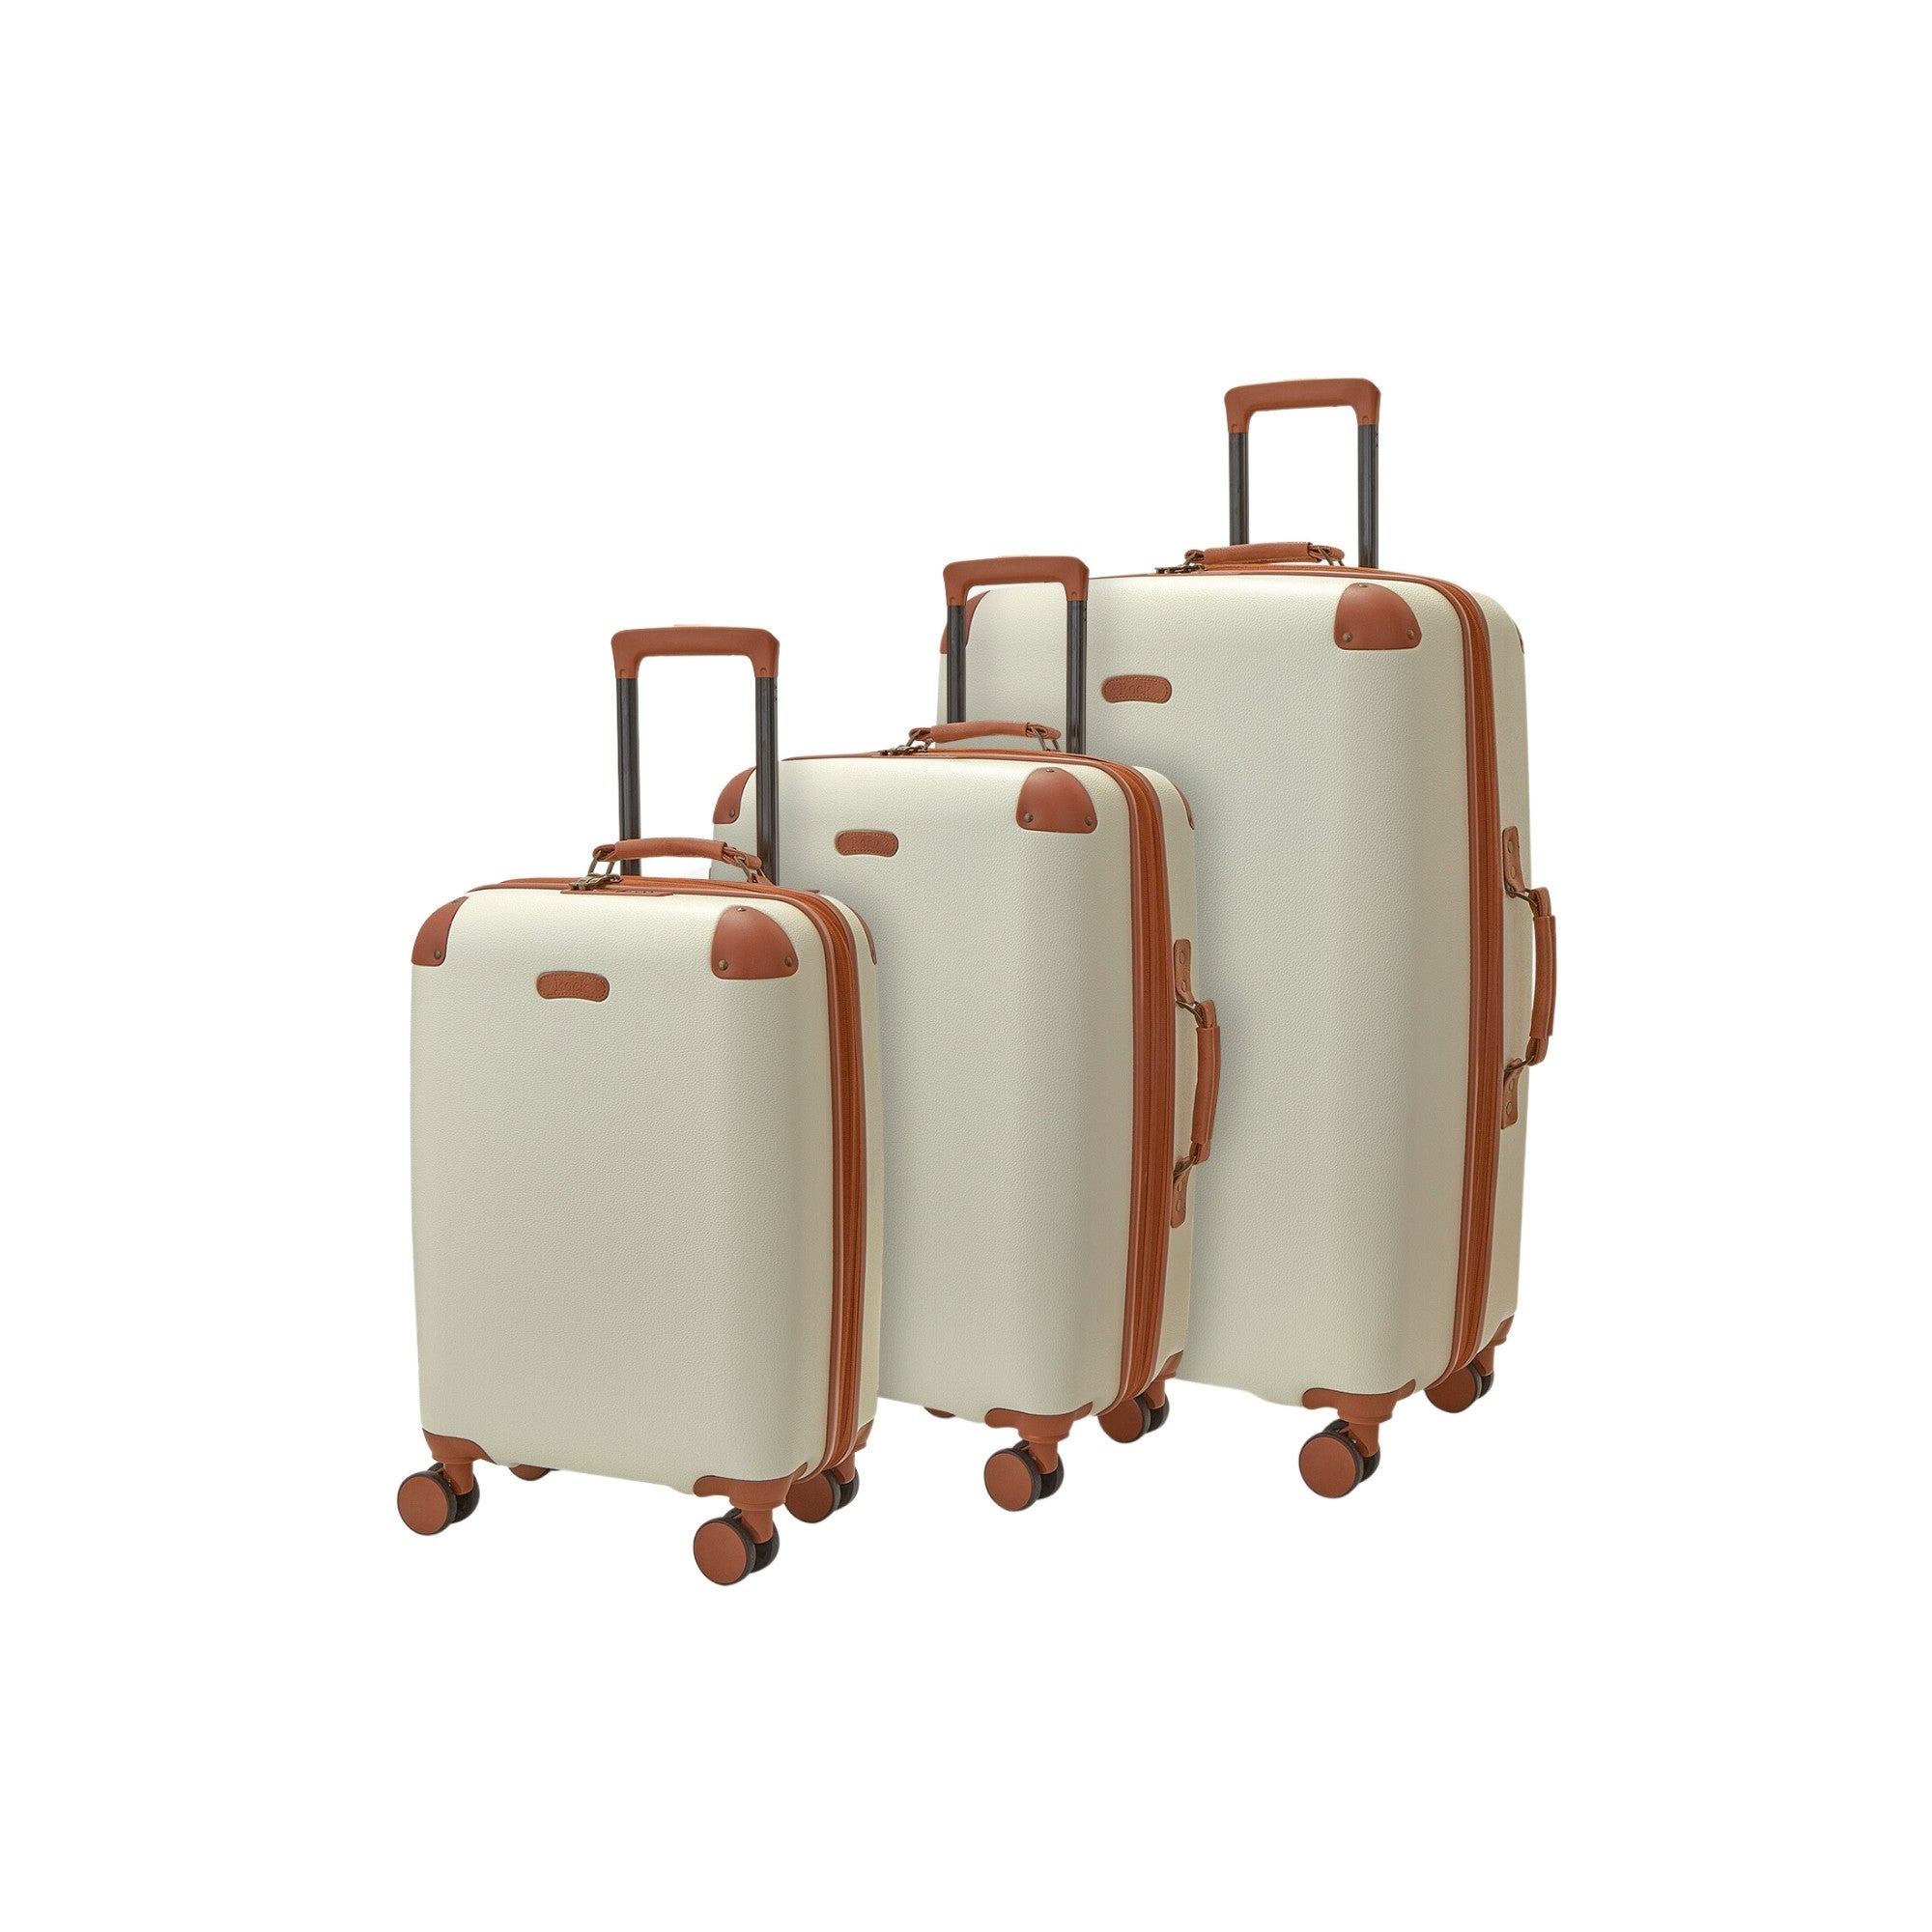 Rock Luggage Carnaby Set of 3 Suitcases